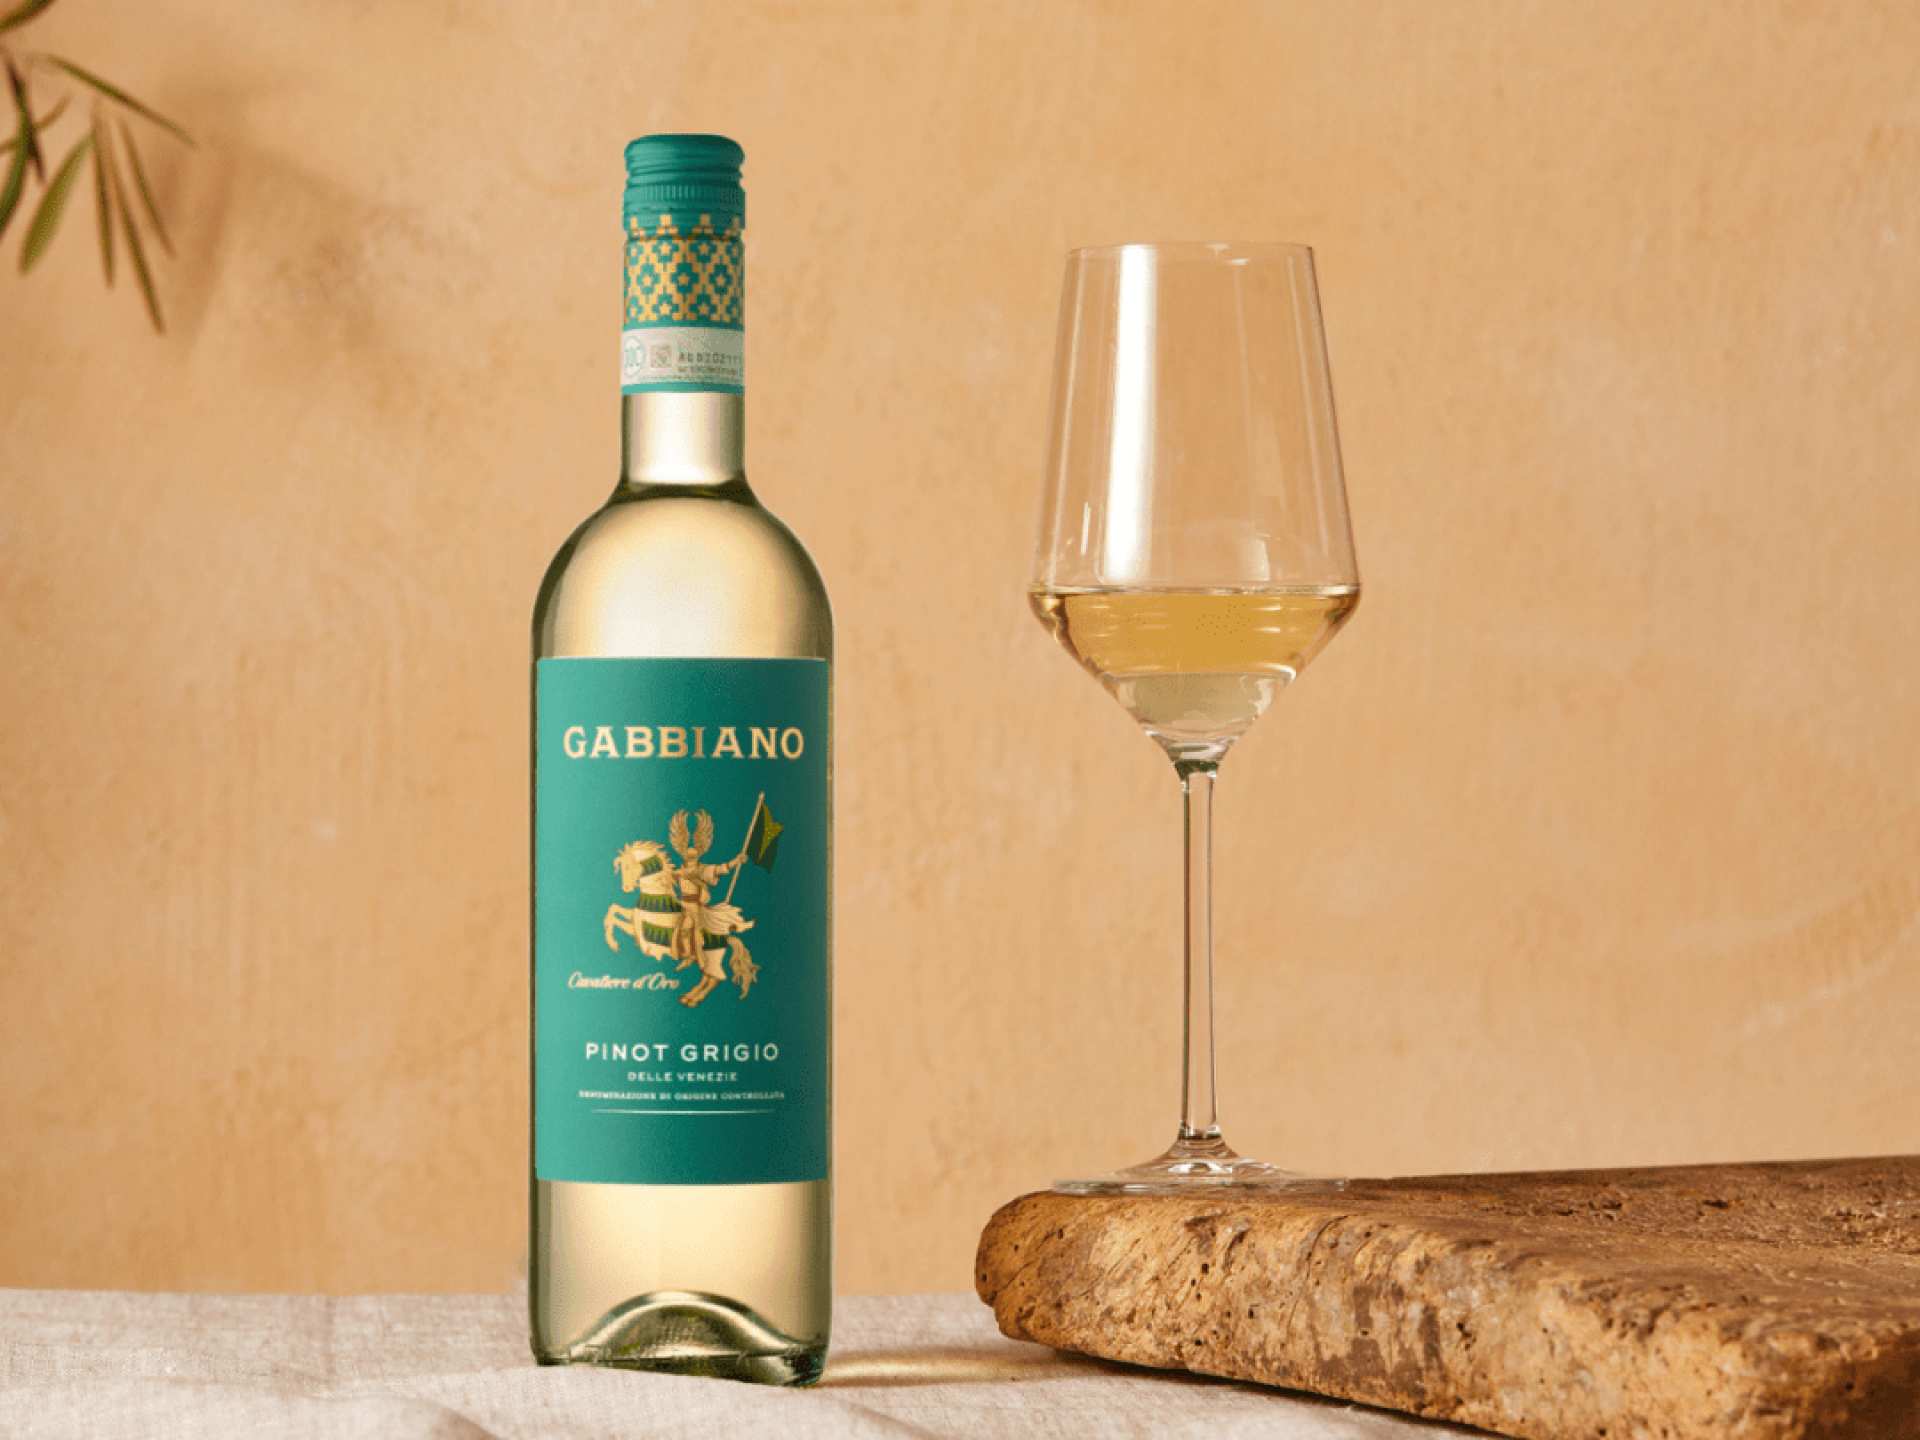 A bottle of Gabbiano Pinot Grigio IGT beside a glass of white wine